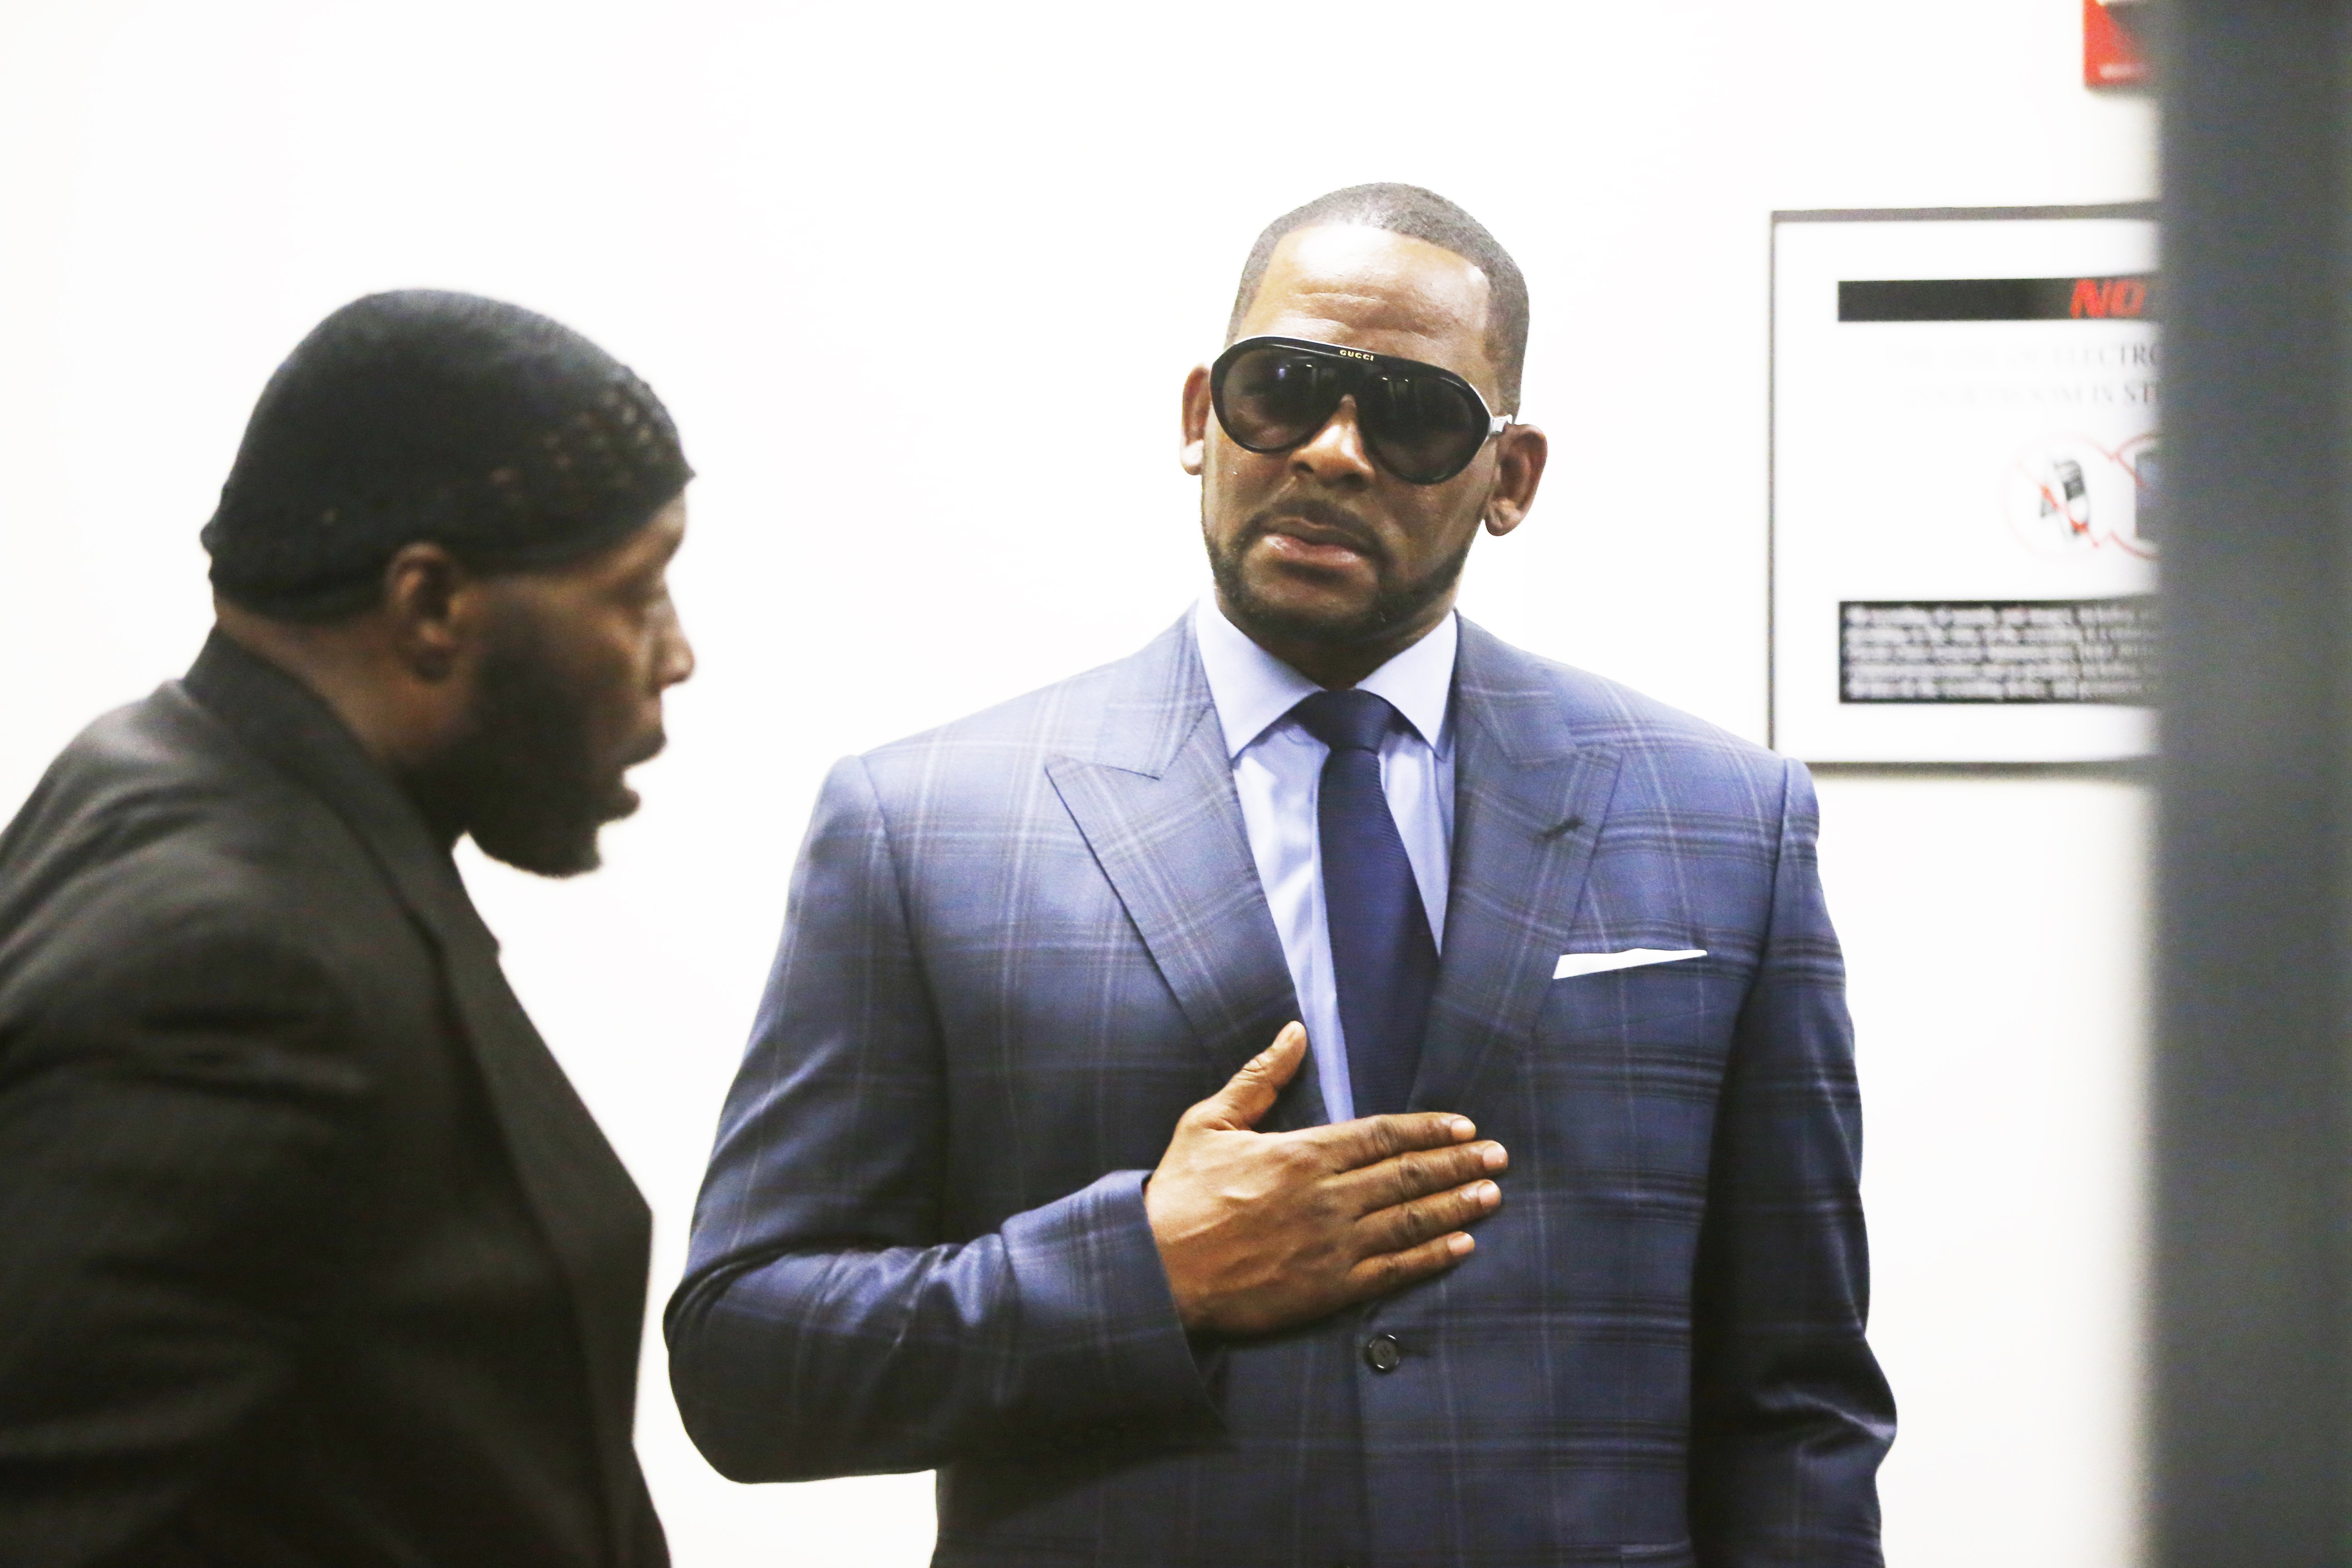  R. Kelly arrives at the Daley Center for his hearing on March 6, 2019 in Chicago, Illinois. | Photo: GettyImages